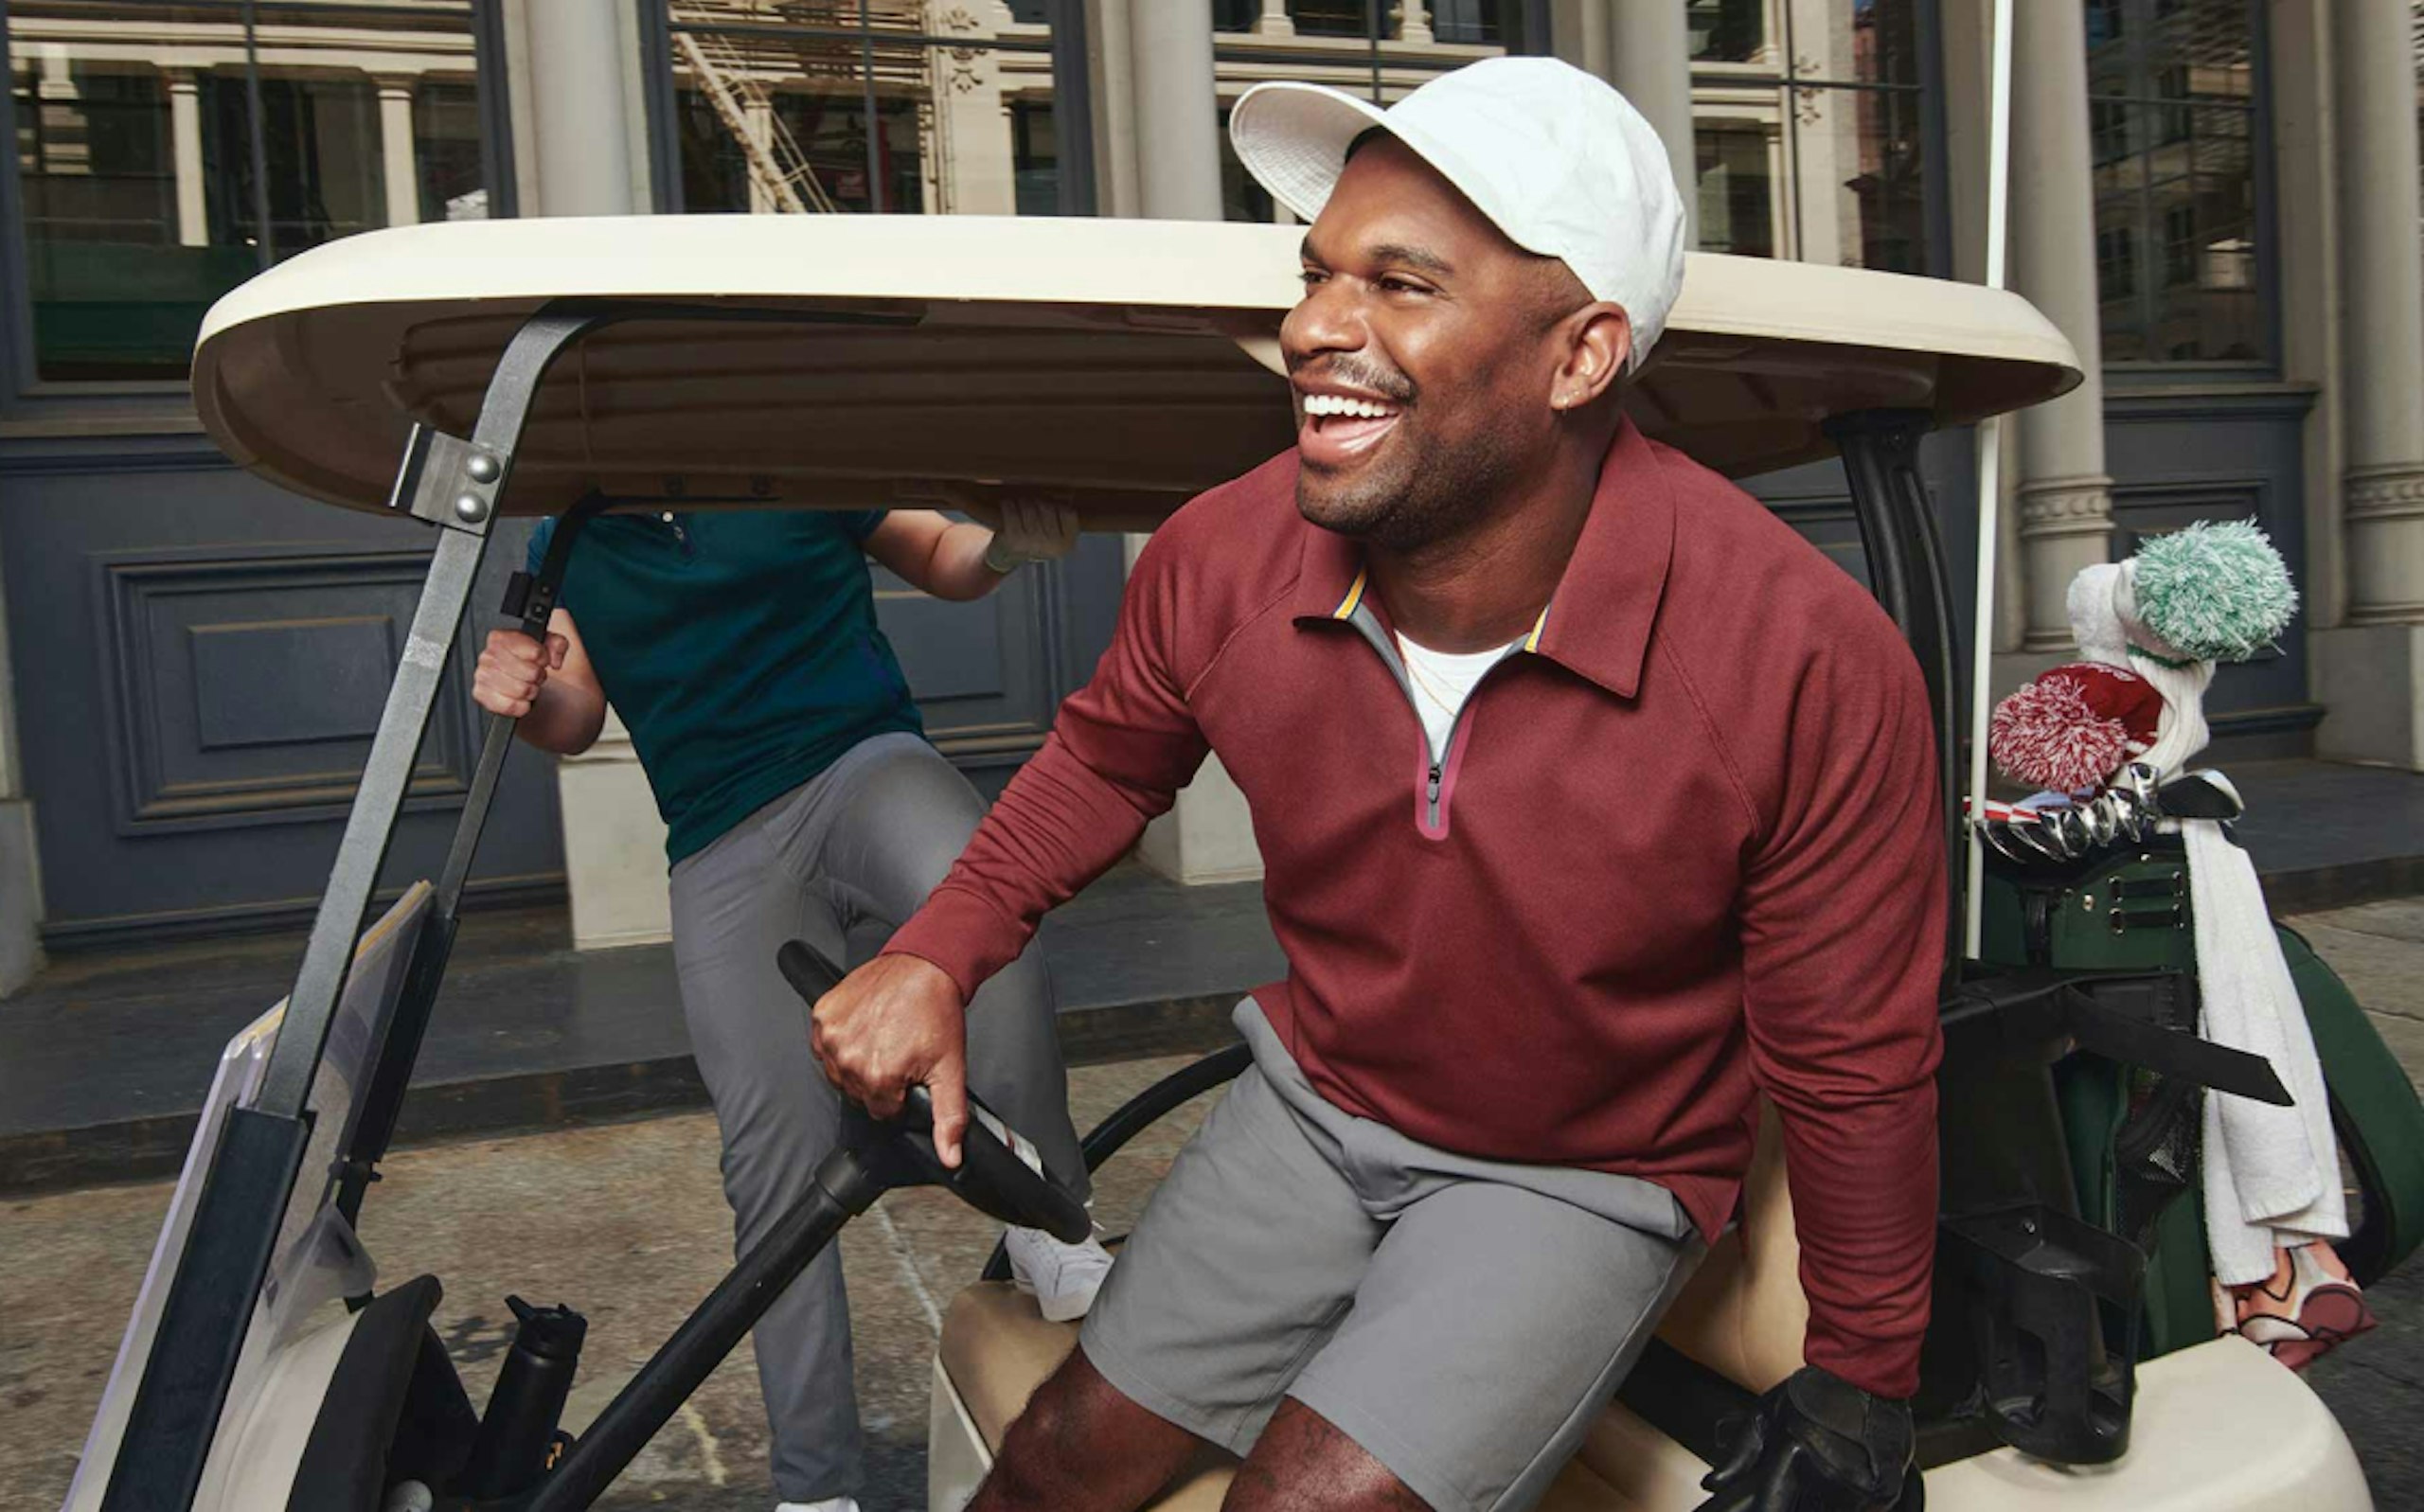 Golf Player smiling getting out of a golf cart with a hand on the wheel. 